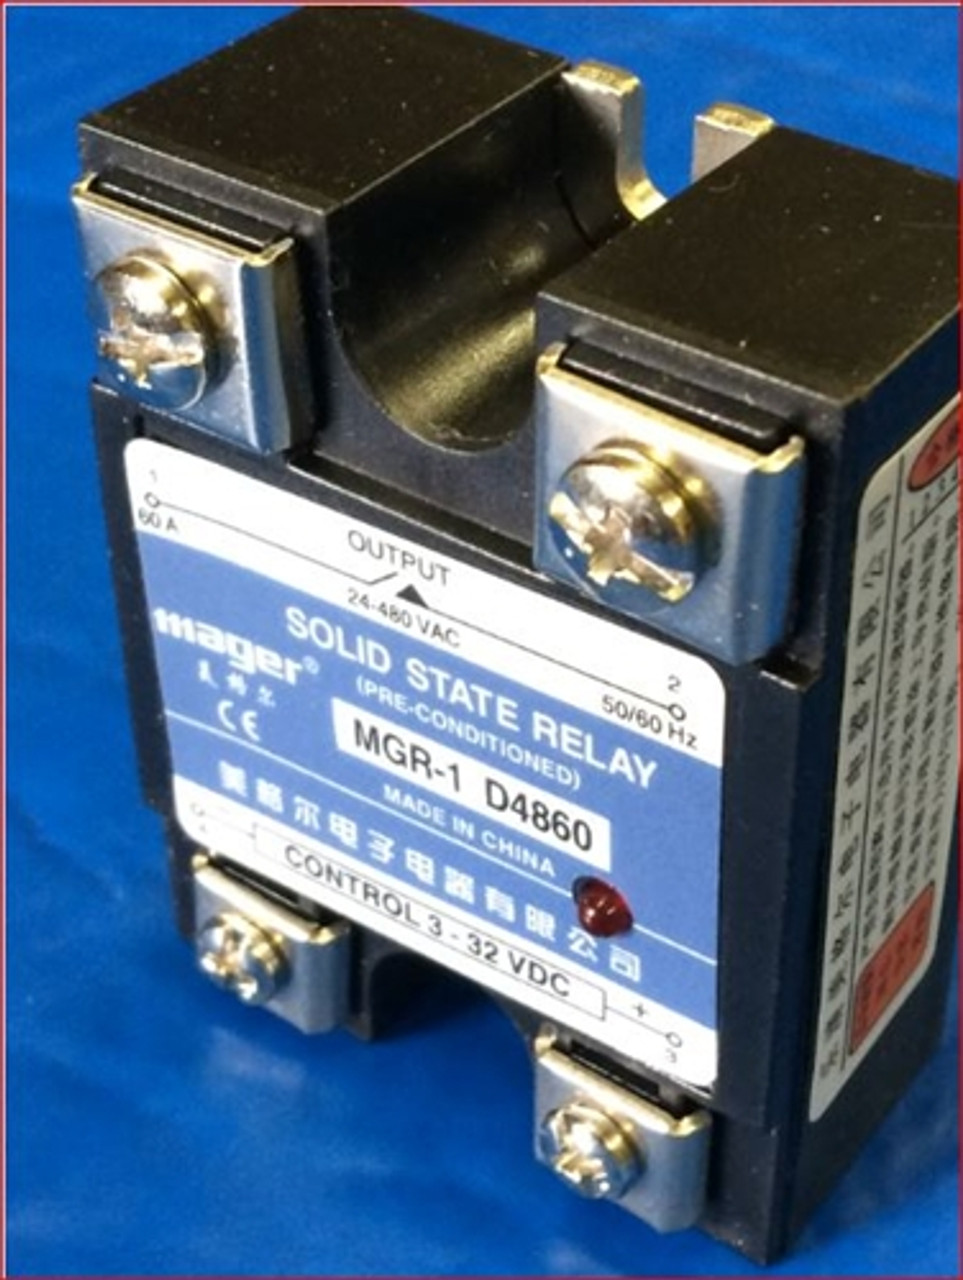 Mager Relay MGR-1 D4860